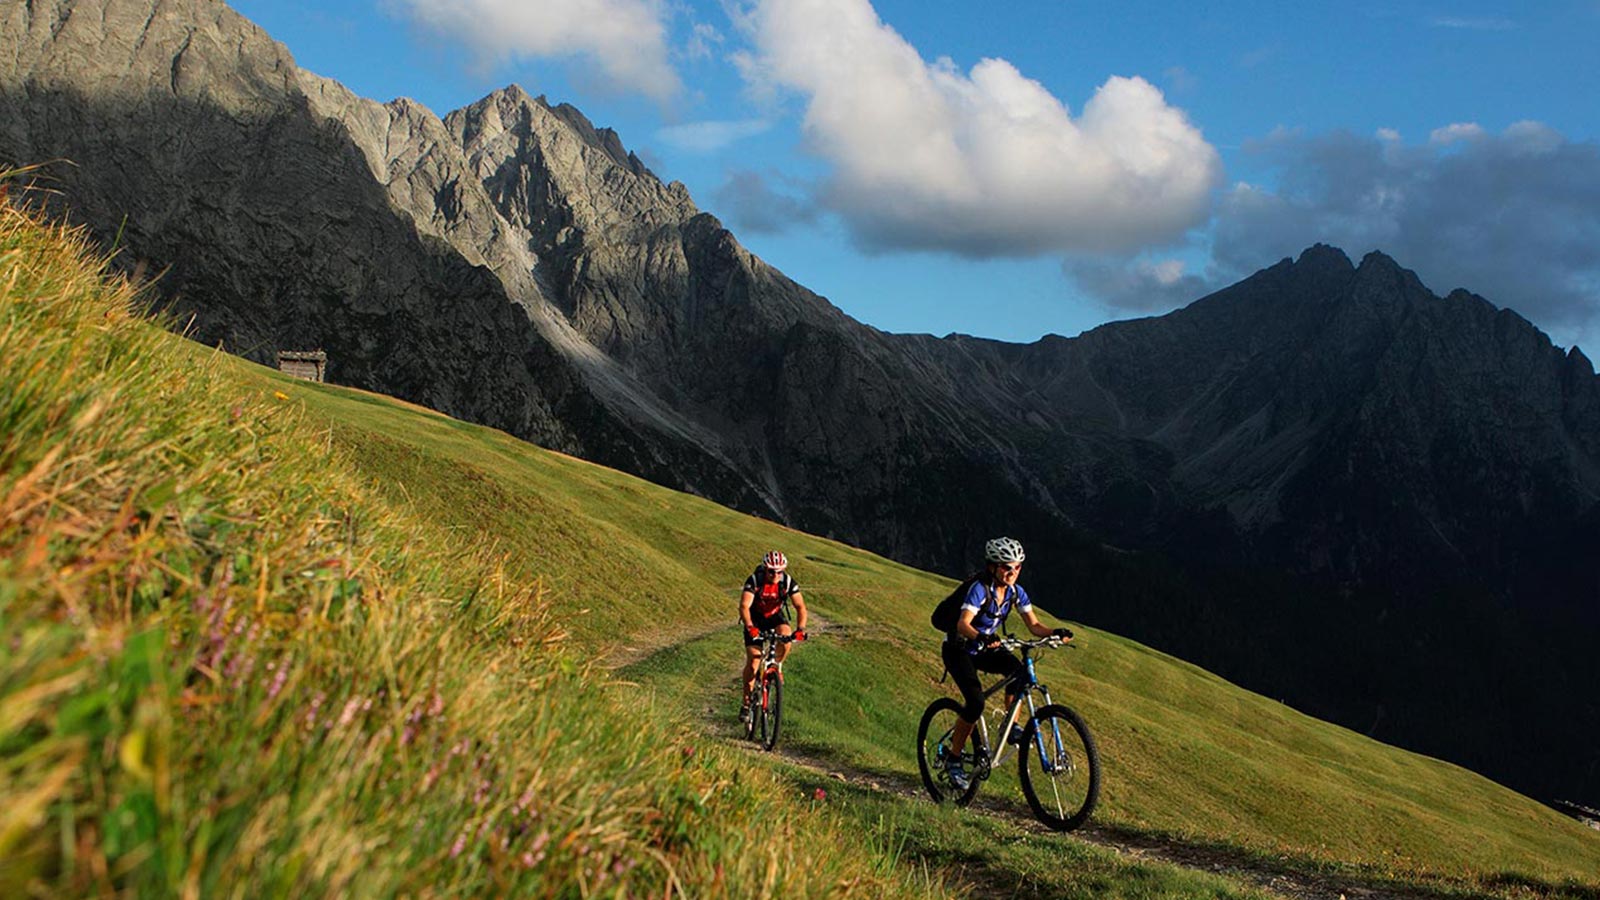 A couple enjoy mountain biking during a sunny day in the Dolomites